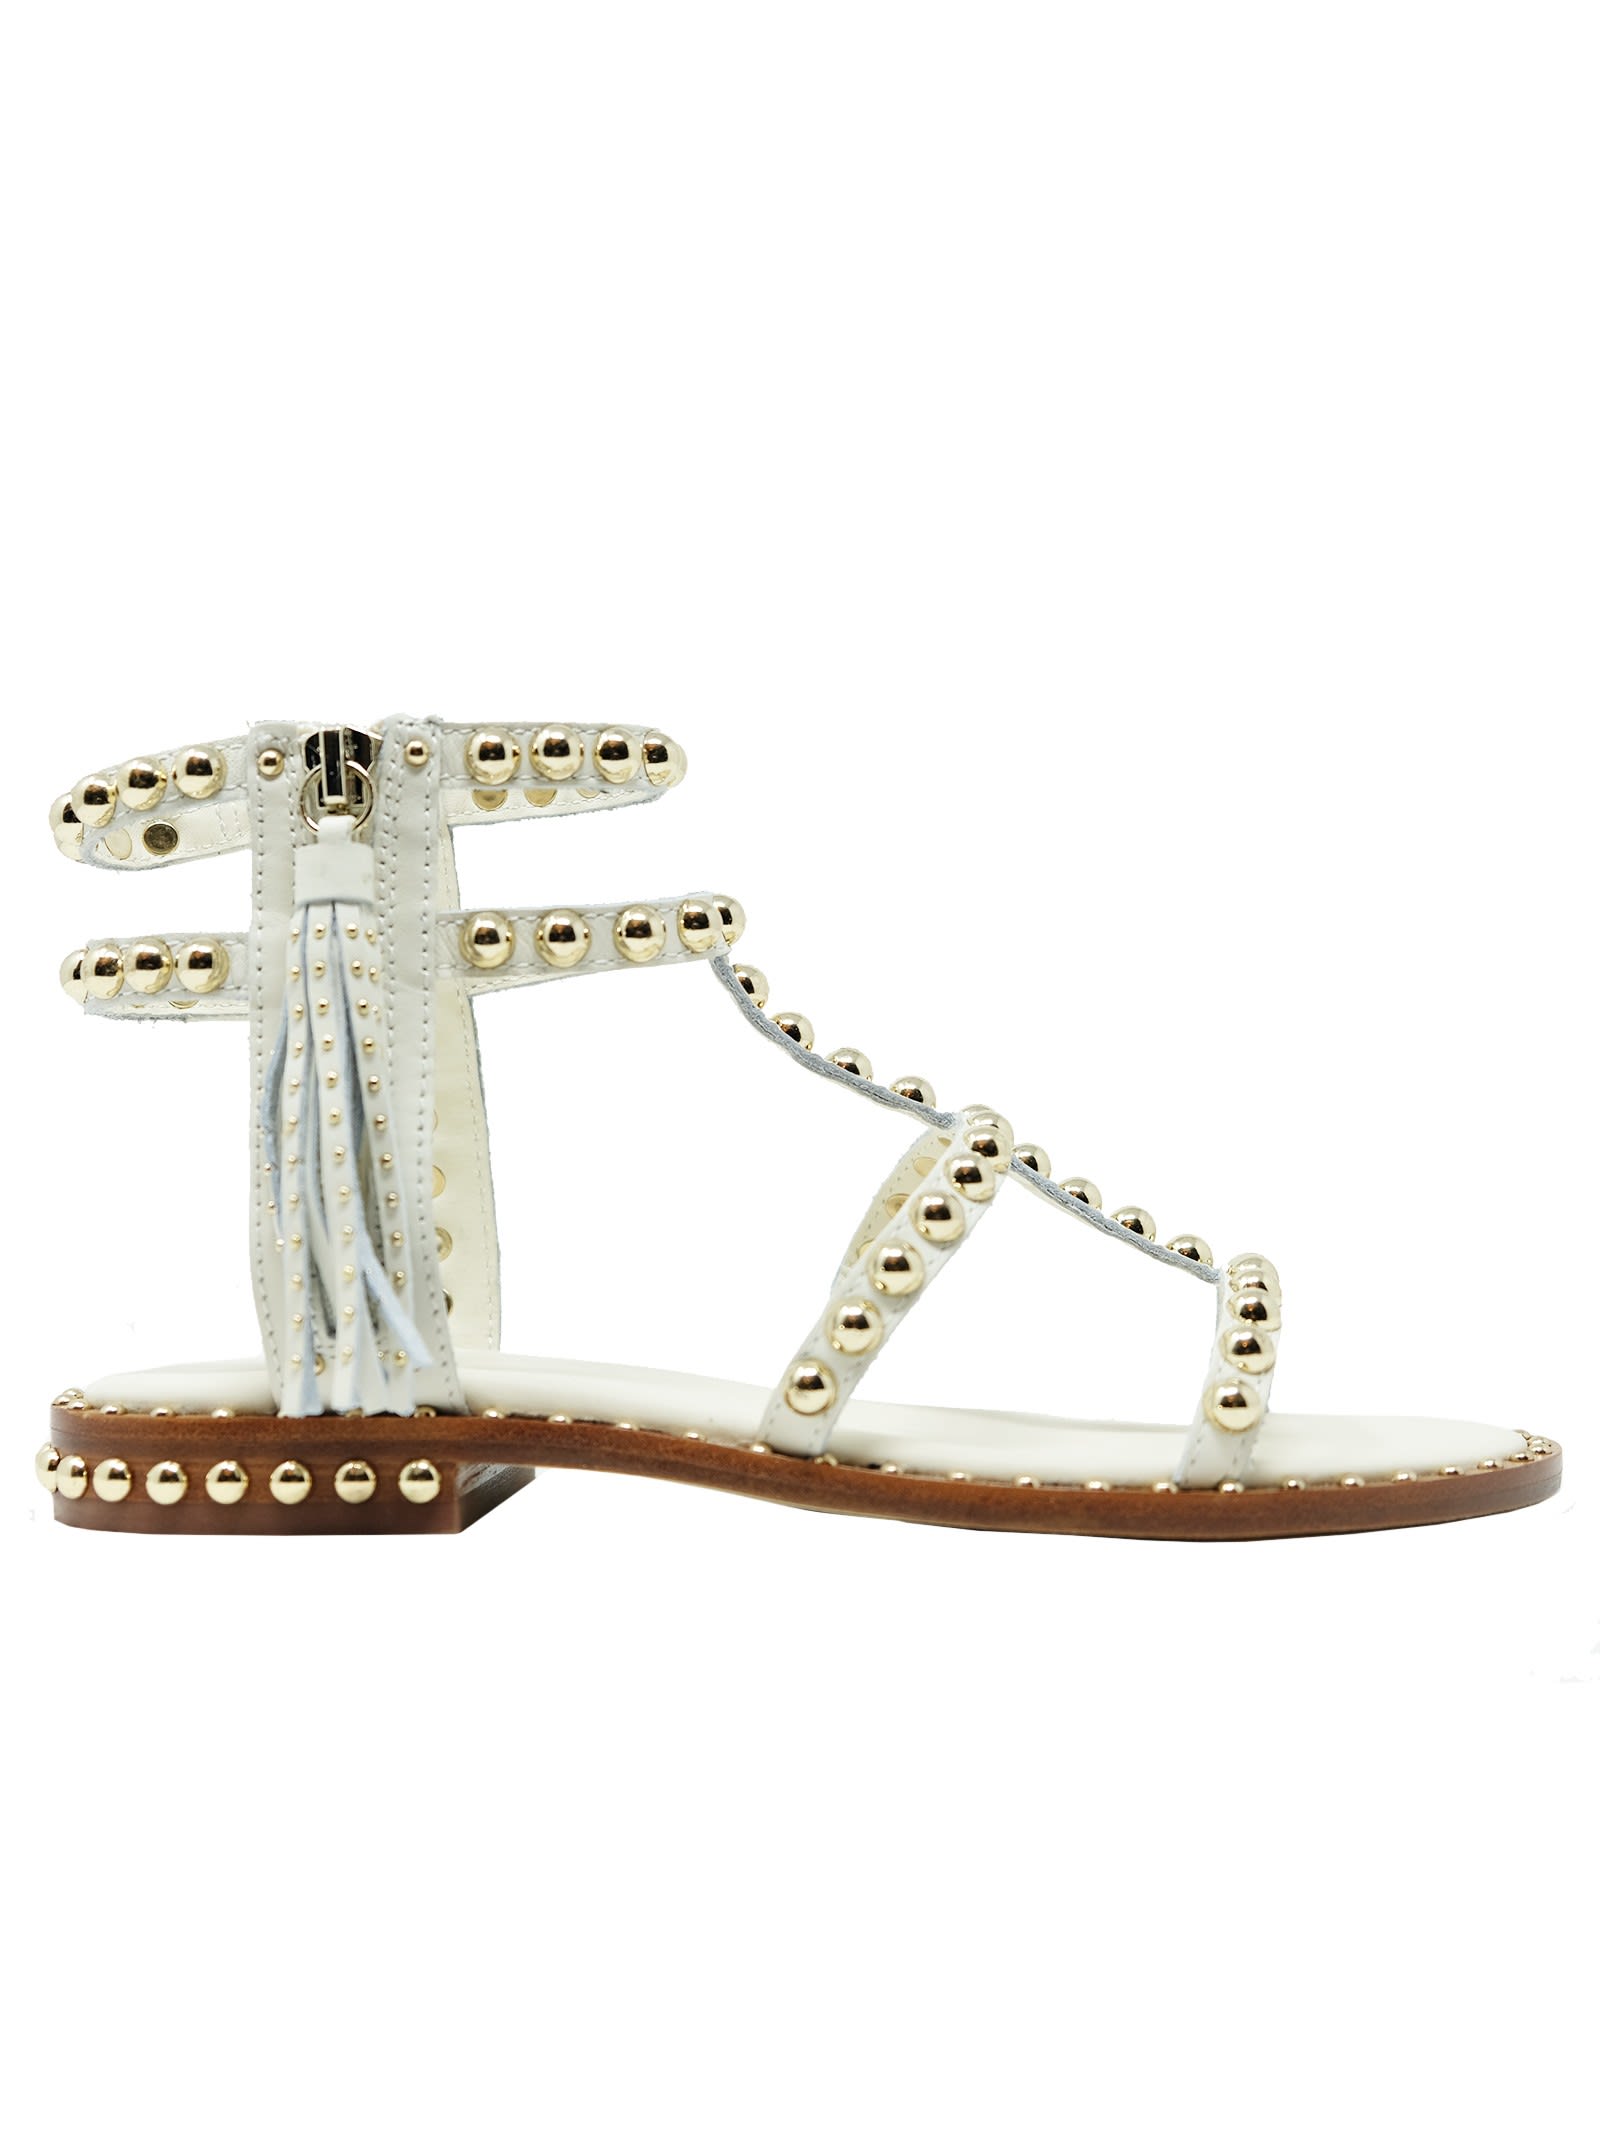 ASH CREAM LEATHER POWER-003 SANDALS,SS21-M-130029-003